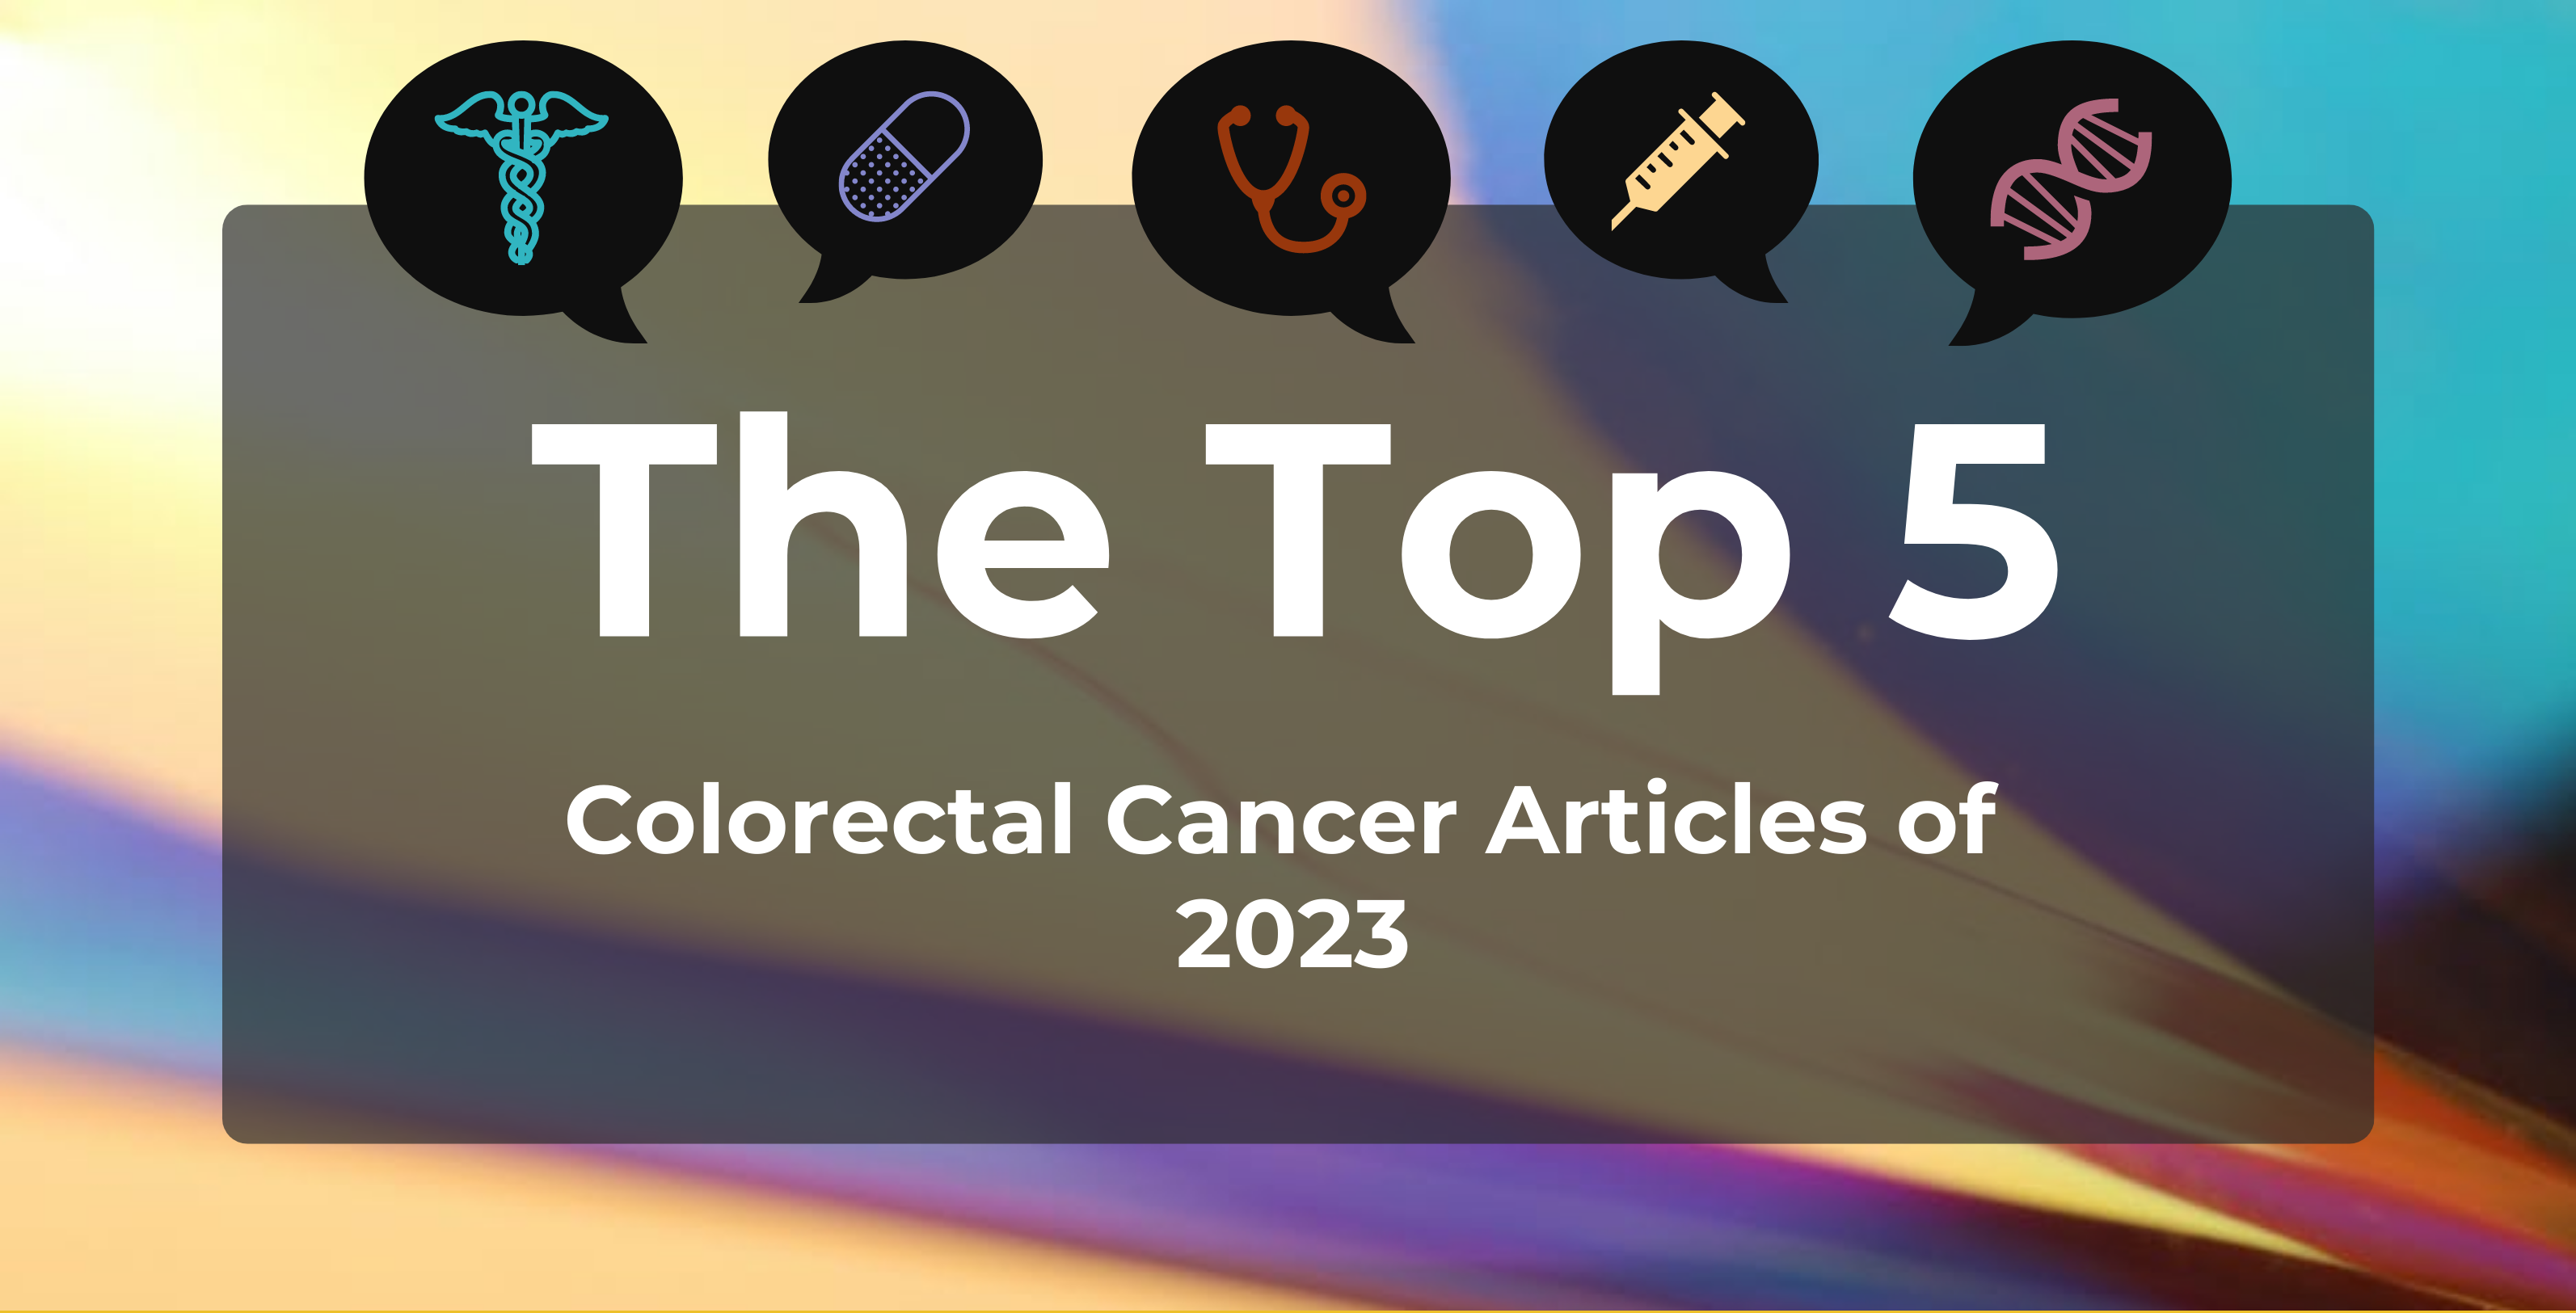 Top 5 Most-Read Colorectal Cancer Articles of 2023